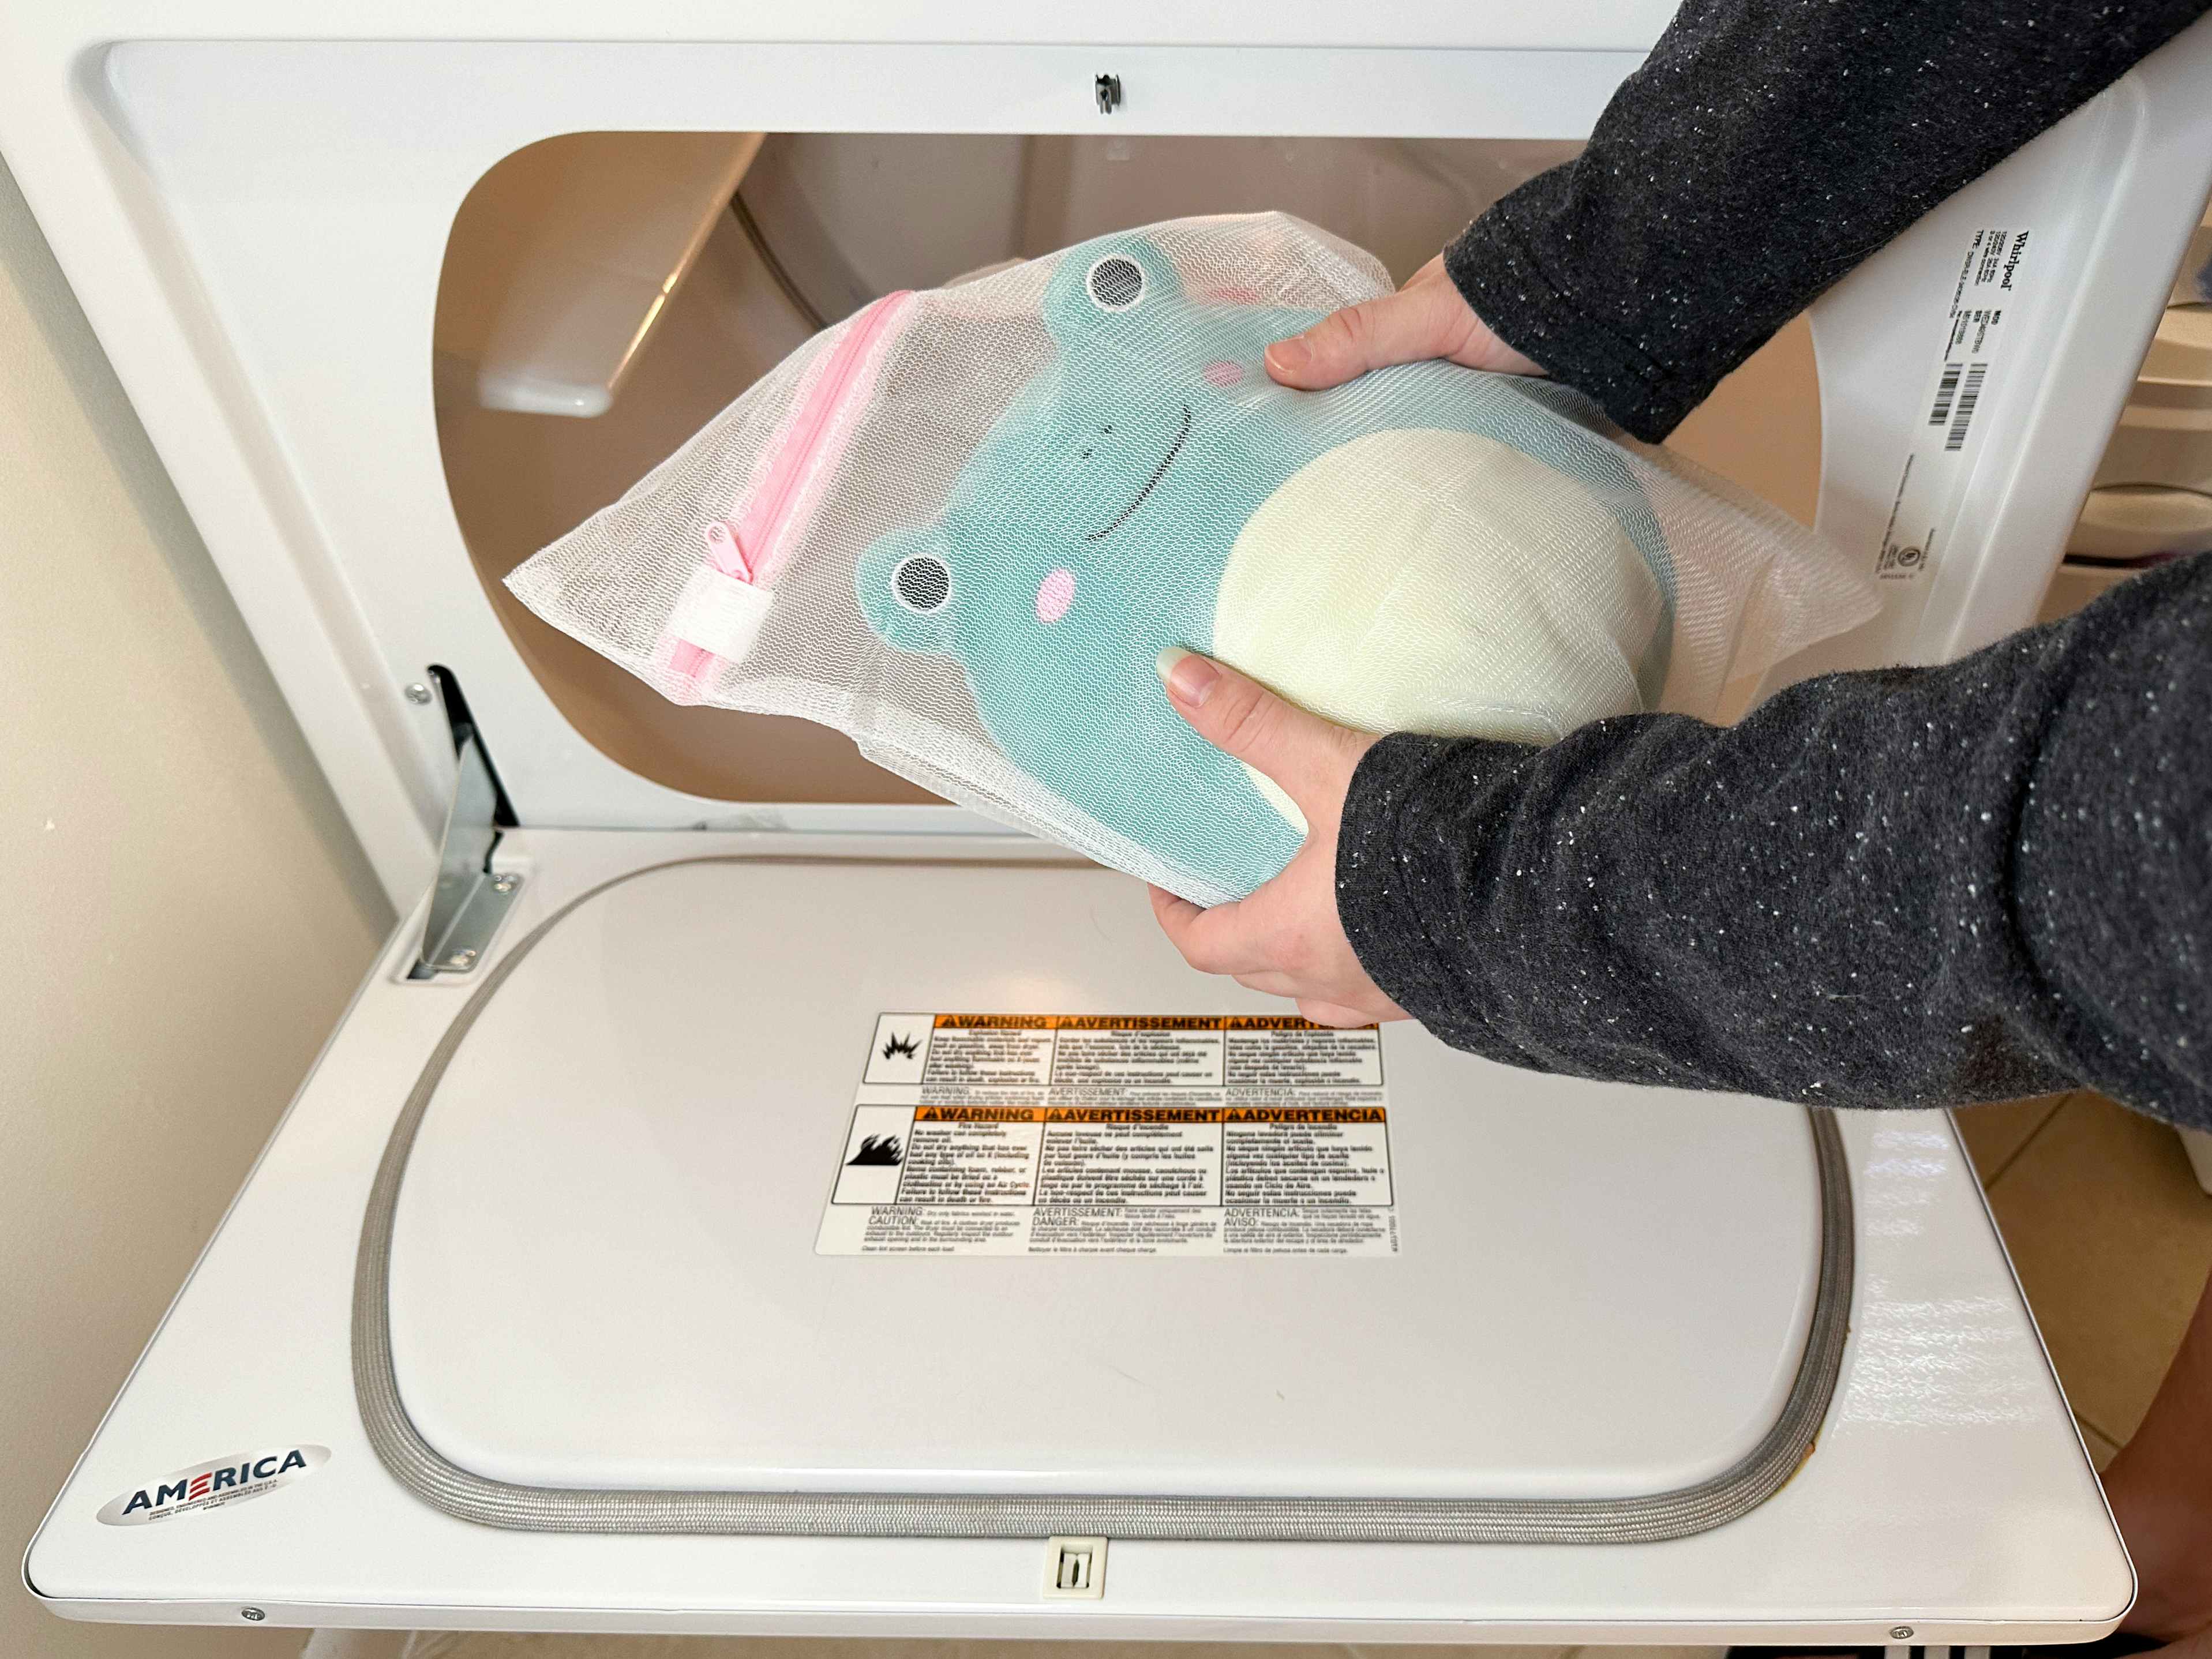 How to Wash Squishmallows so You Don't Flatten Their Fluff